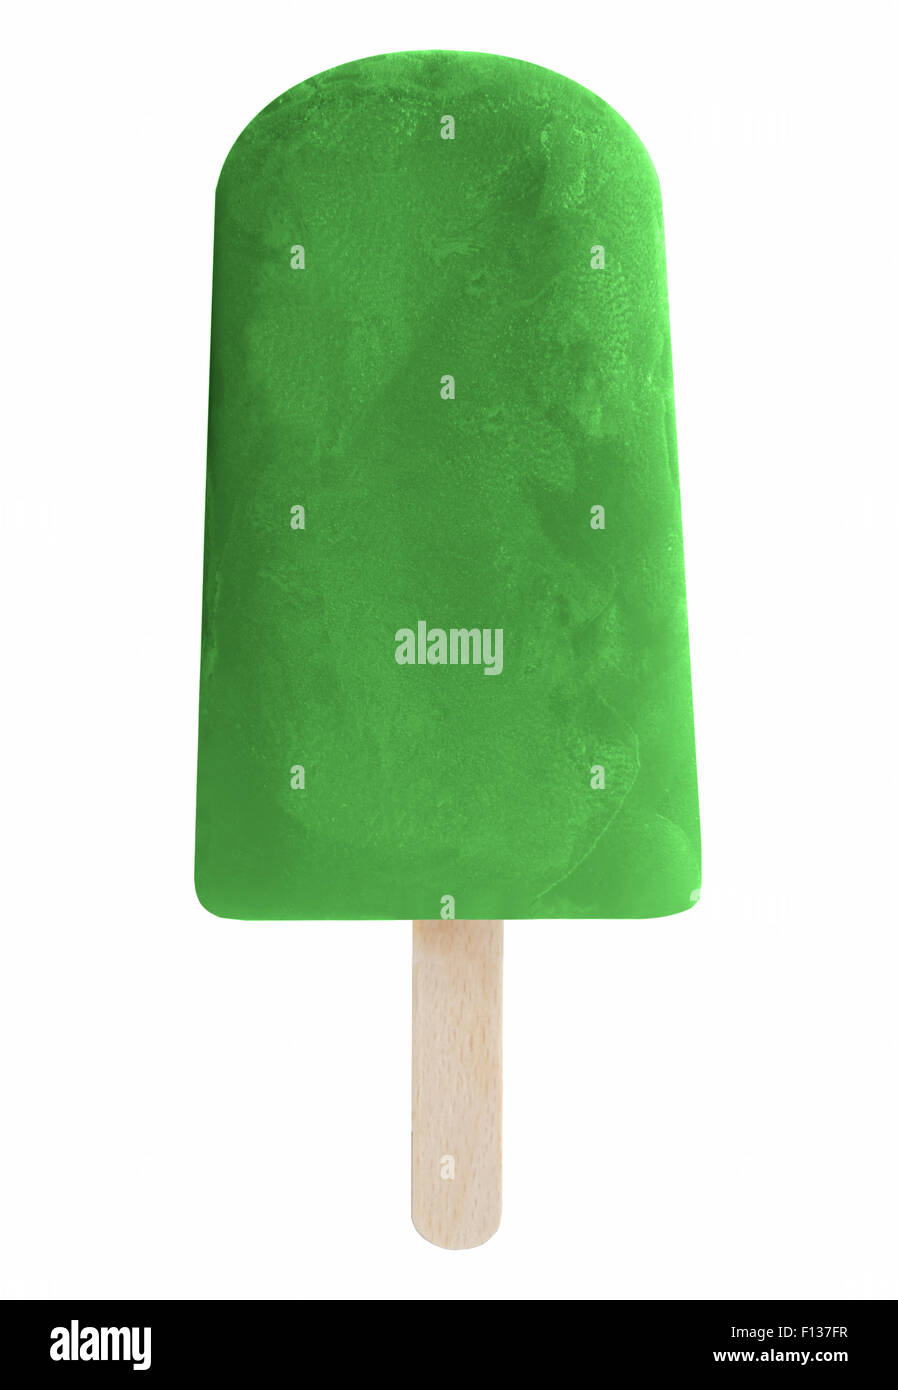 Green ice lolly pop over a white background Stock Photo